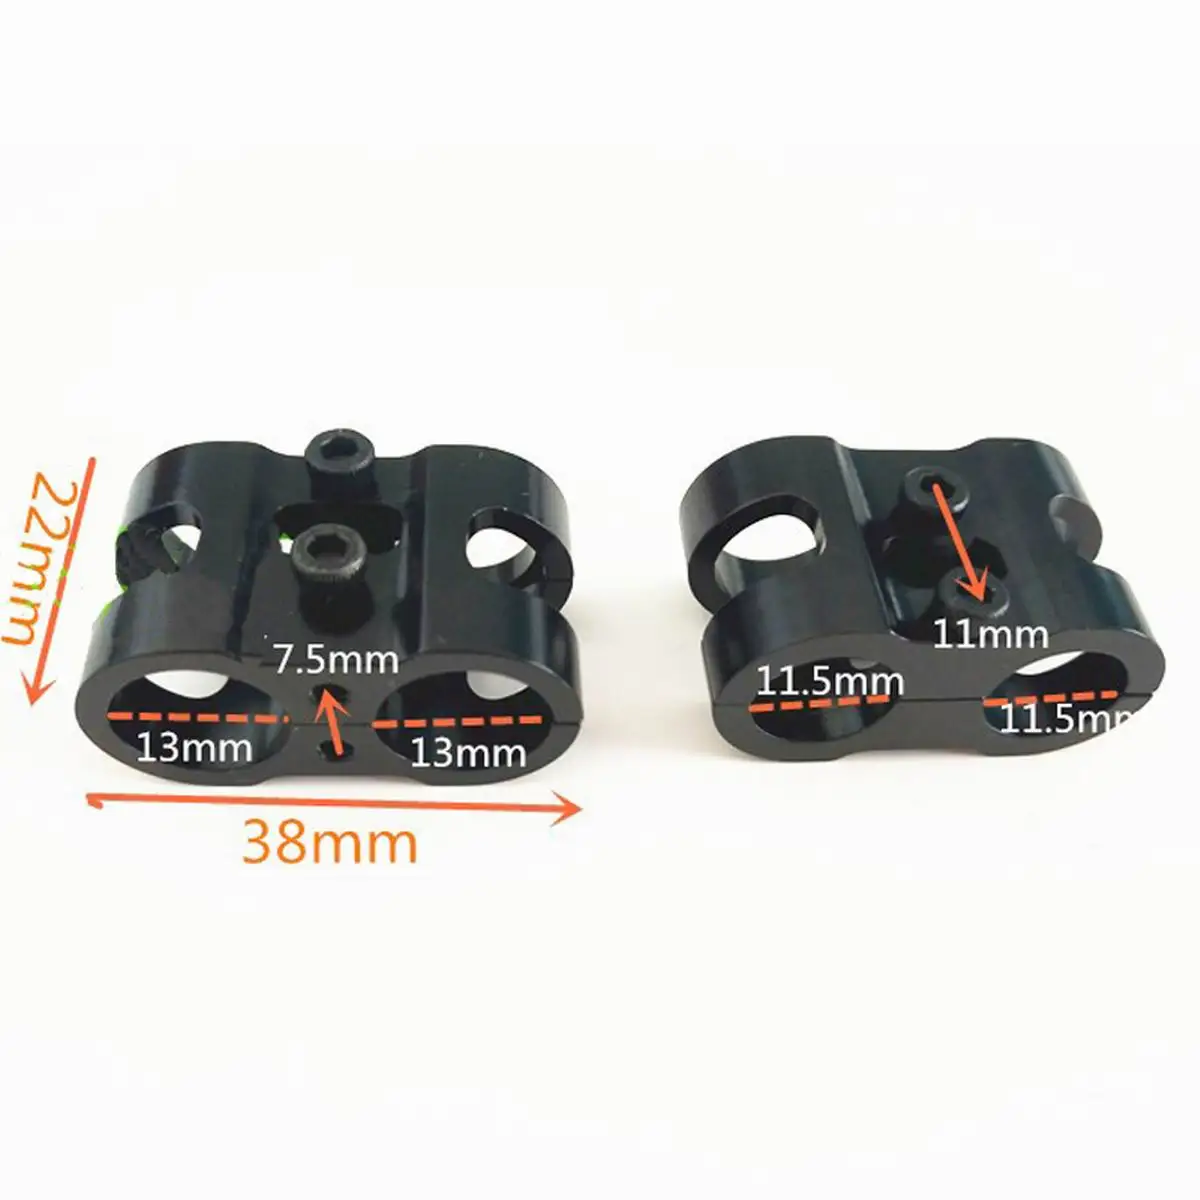 

2Pcs Aluminum AS150 Mount Fixed Seat Connector Plug Holder For Agricultural Drone UAV